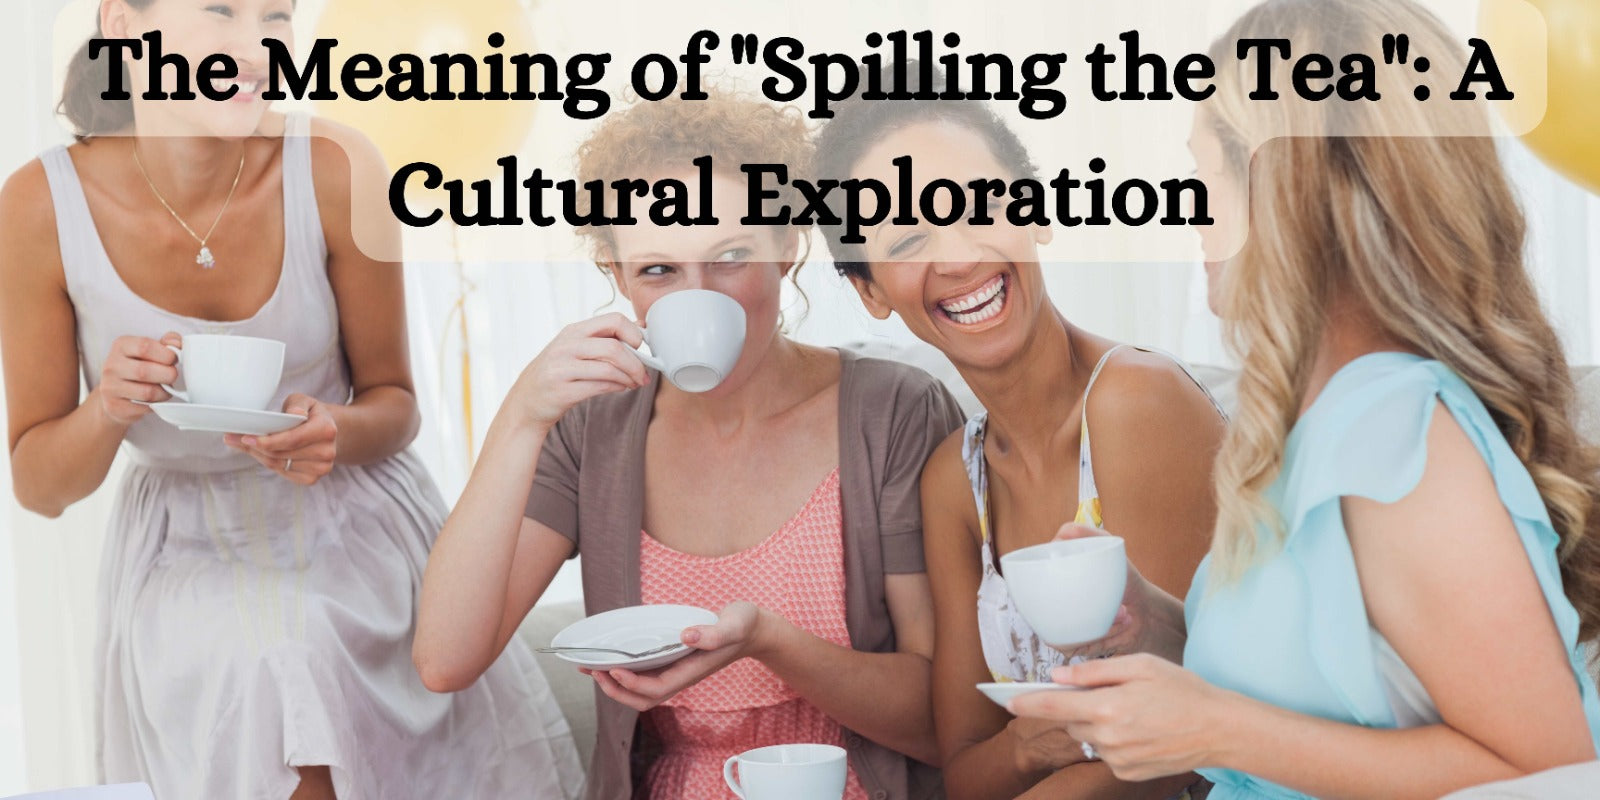 The Meaning of "Spilling the Tea": A Cultural Exploration